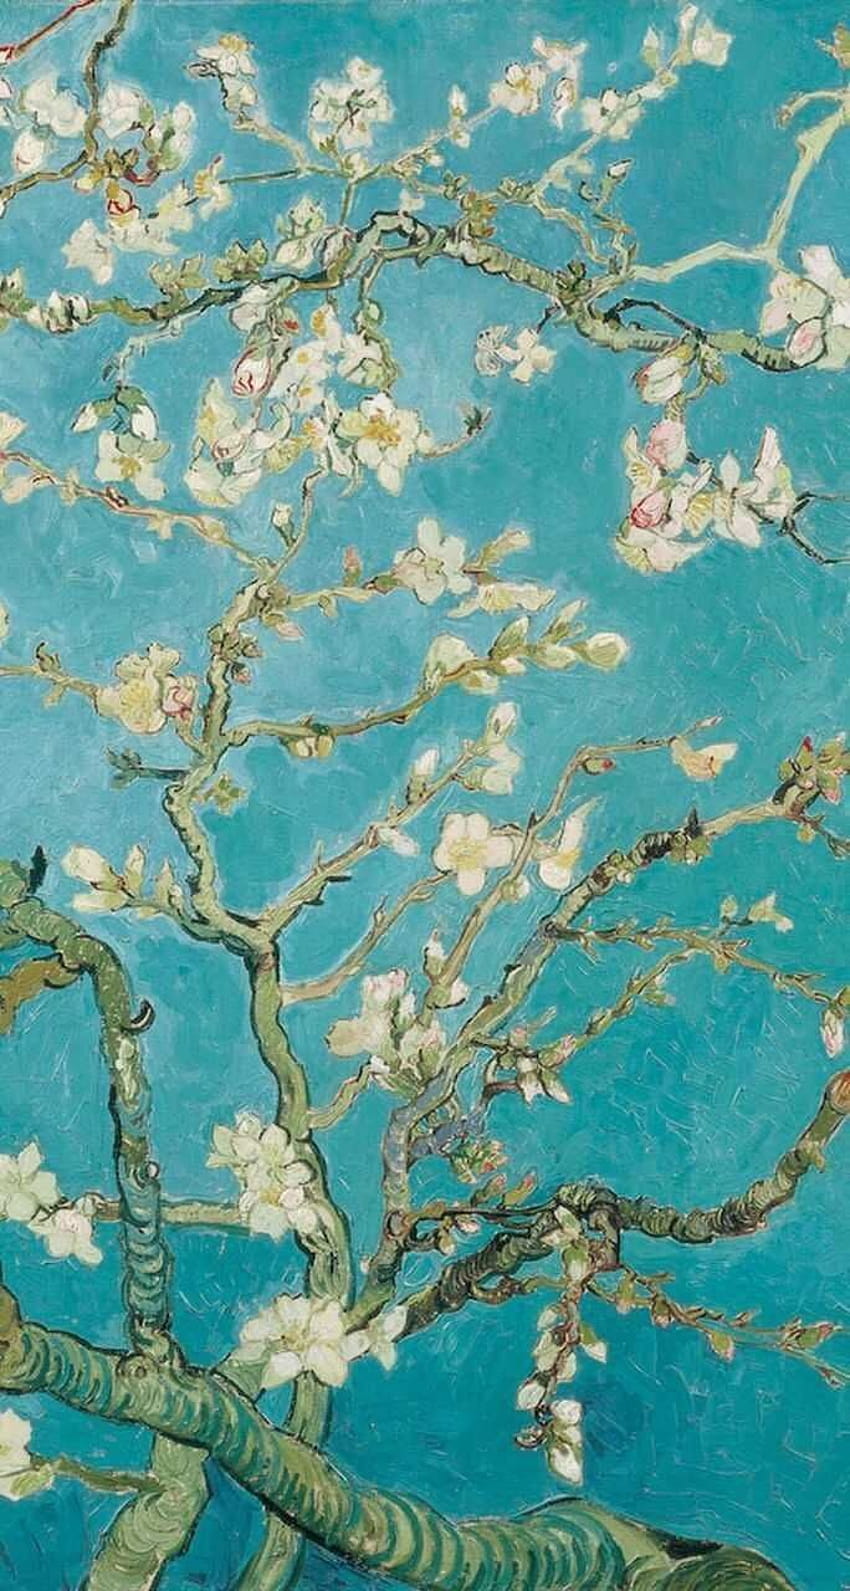 10 New Van Gogh Almond Blossoms FULL 19201080 For PC Backgrounds HD phone wallpaper